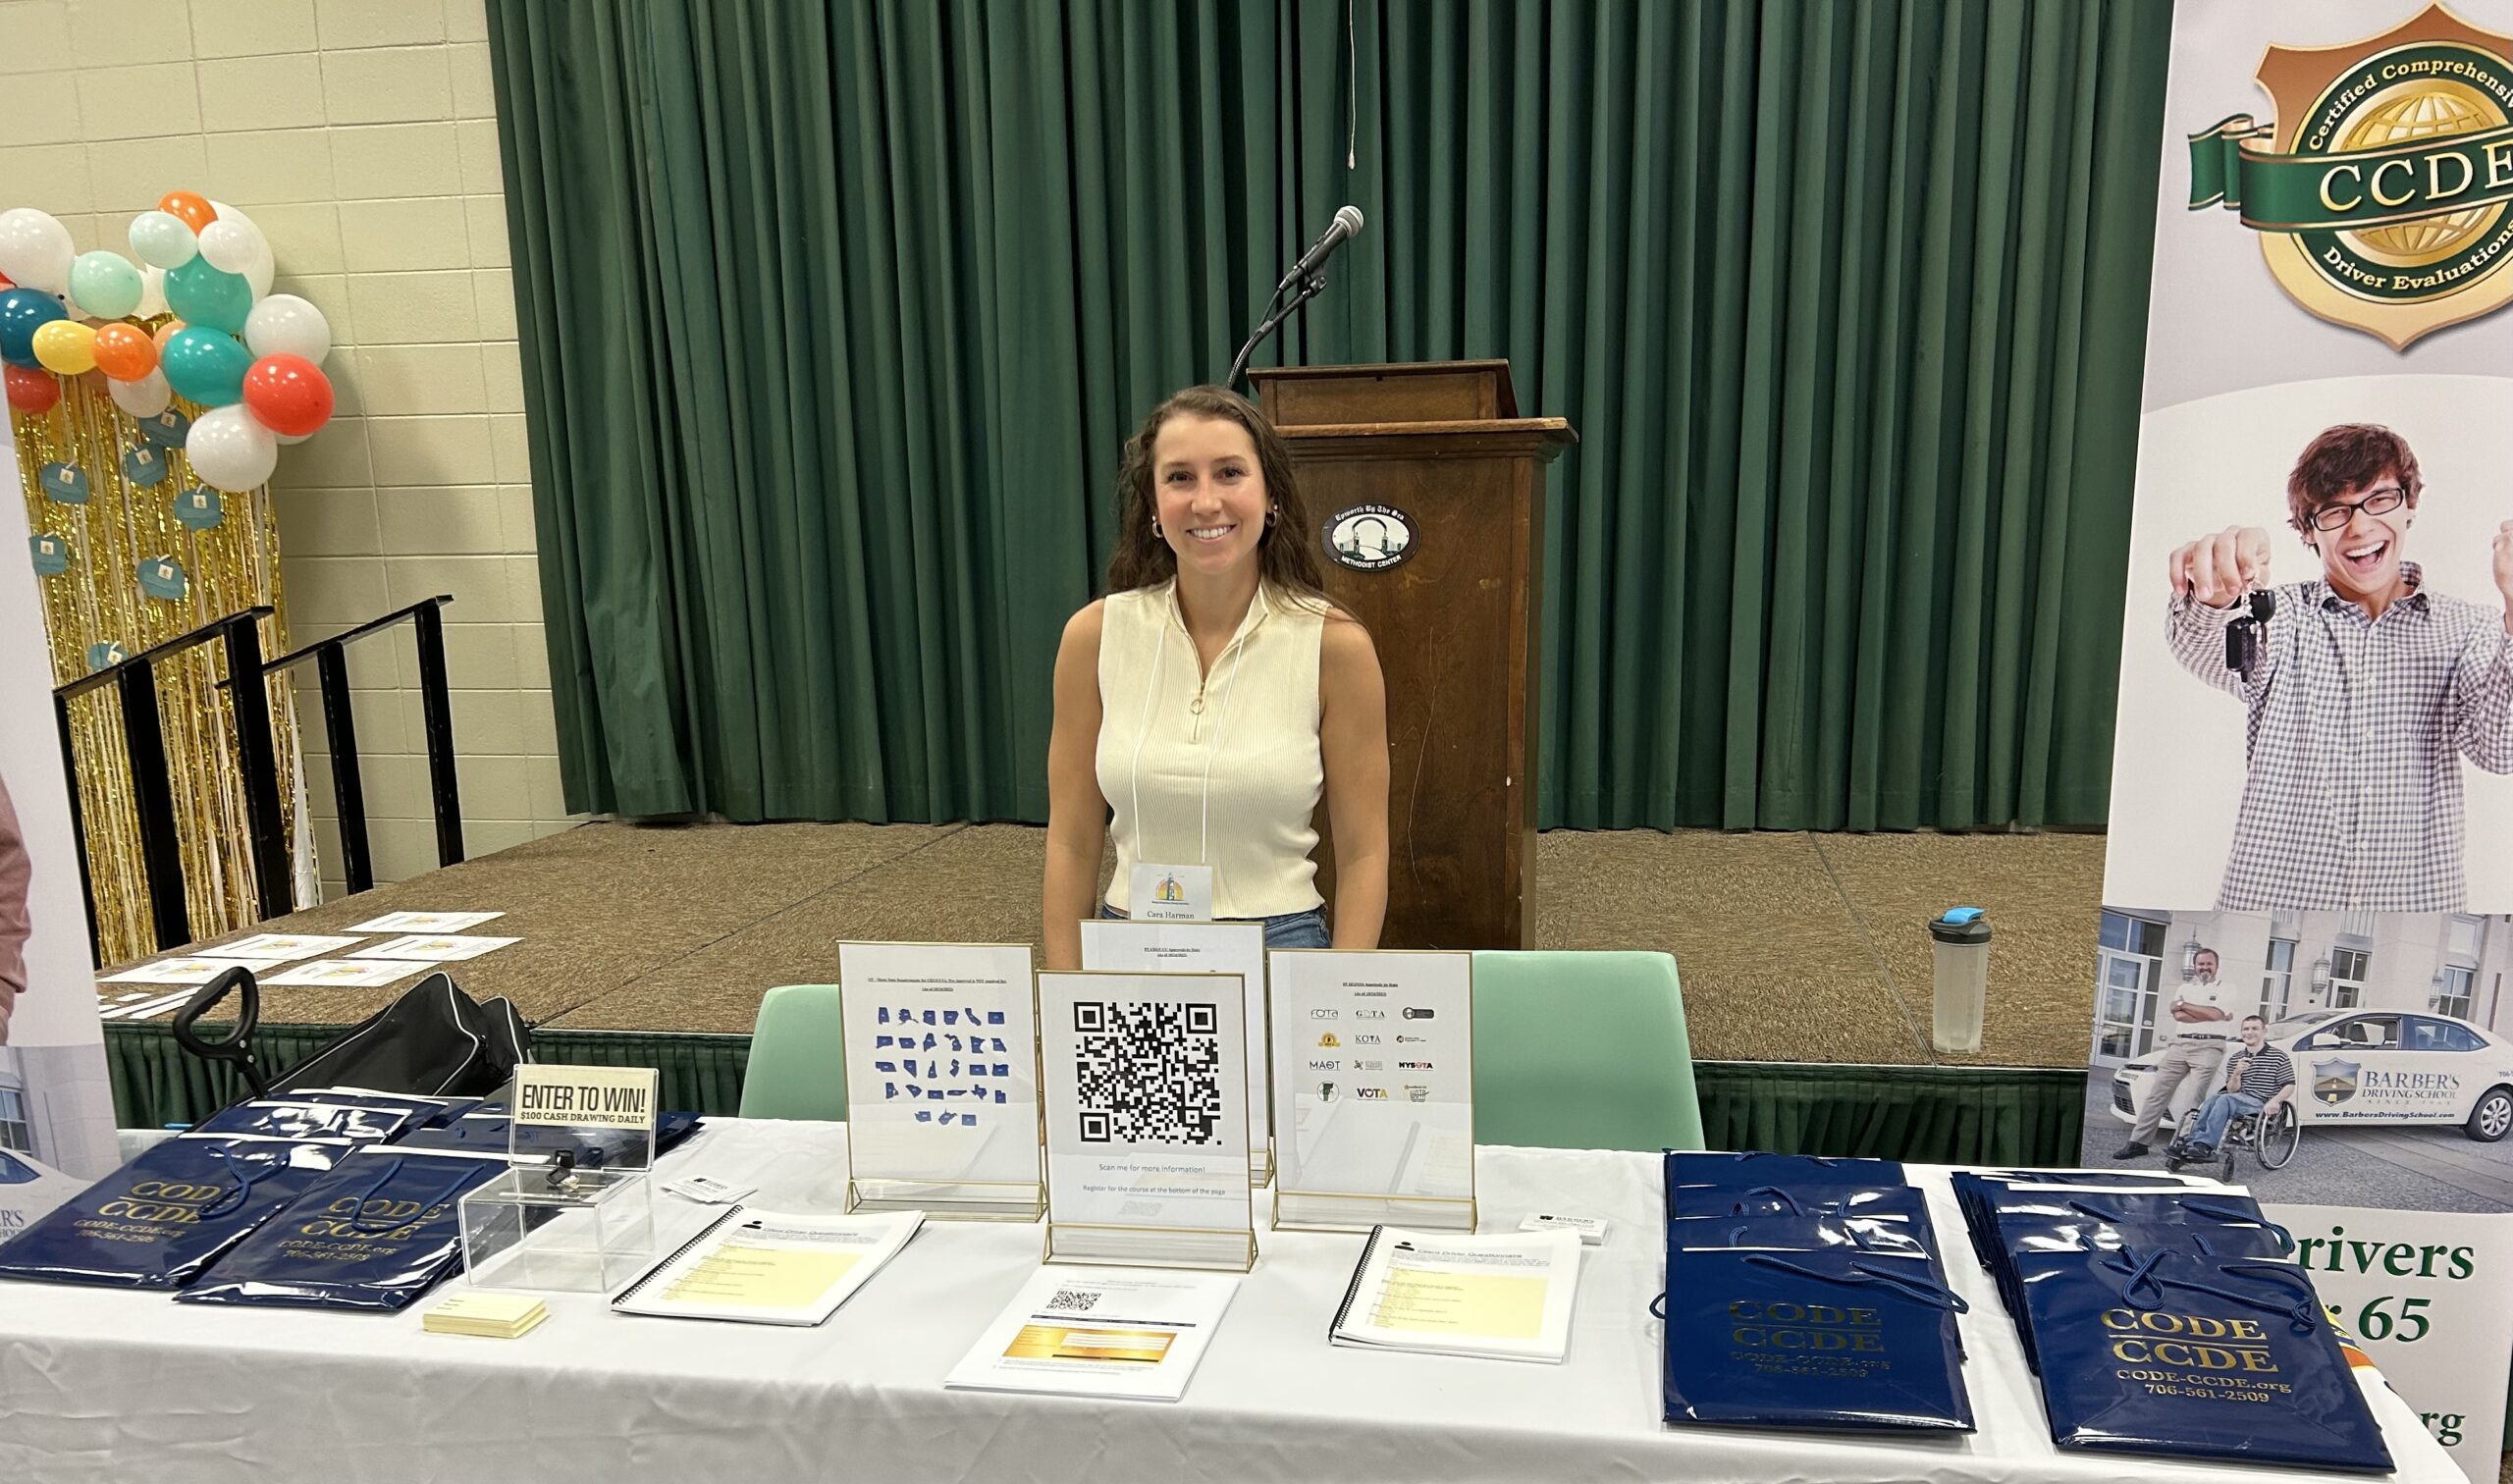 Cara Harman hosting an exhibitor booth on driving evaluations at the Georgia OT (GOTA) conference